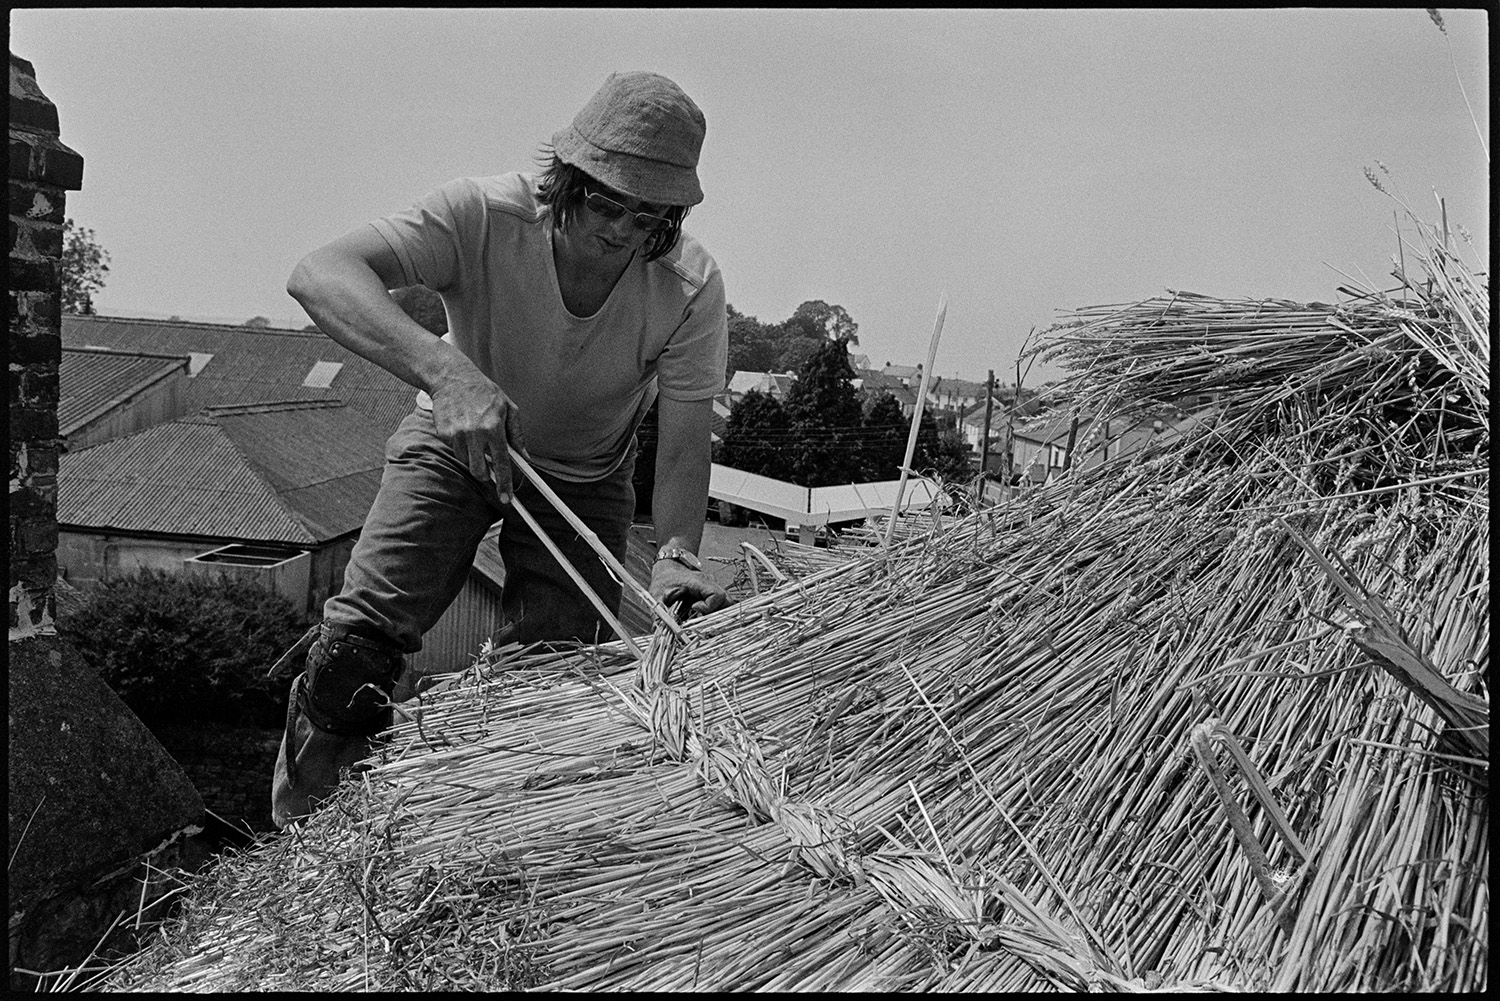 Thatcher thatching, taken from top of roof. 
[Nigel Ward thatching a roof in Beaford. He is using a spar to secure the thatch. The images is taken from the rooftop he is thatching and other roofs can be seen in the background.]